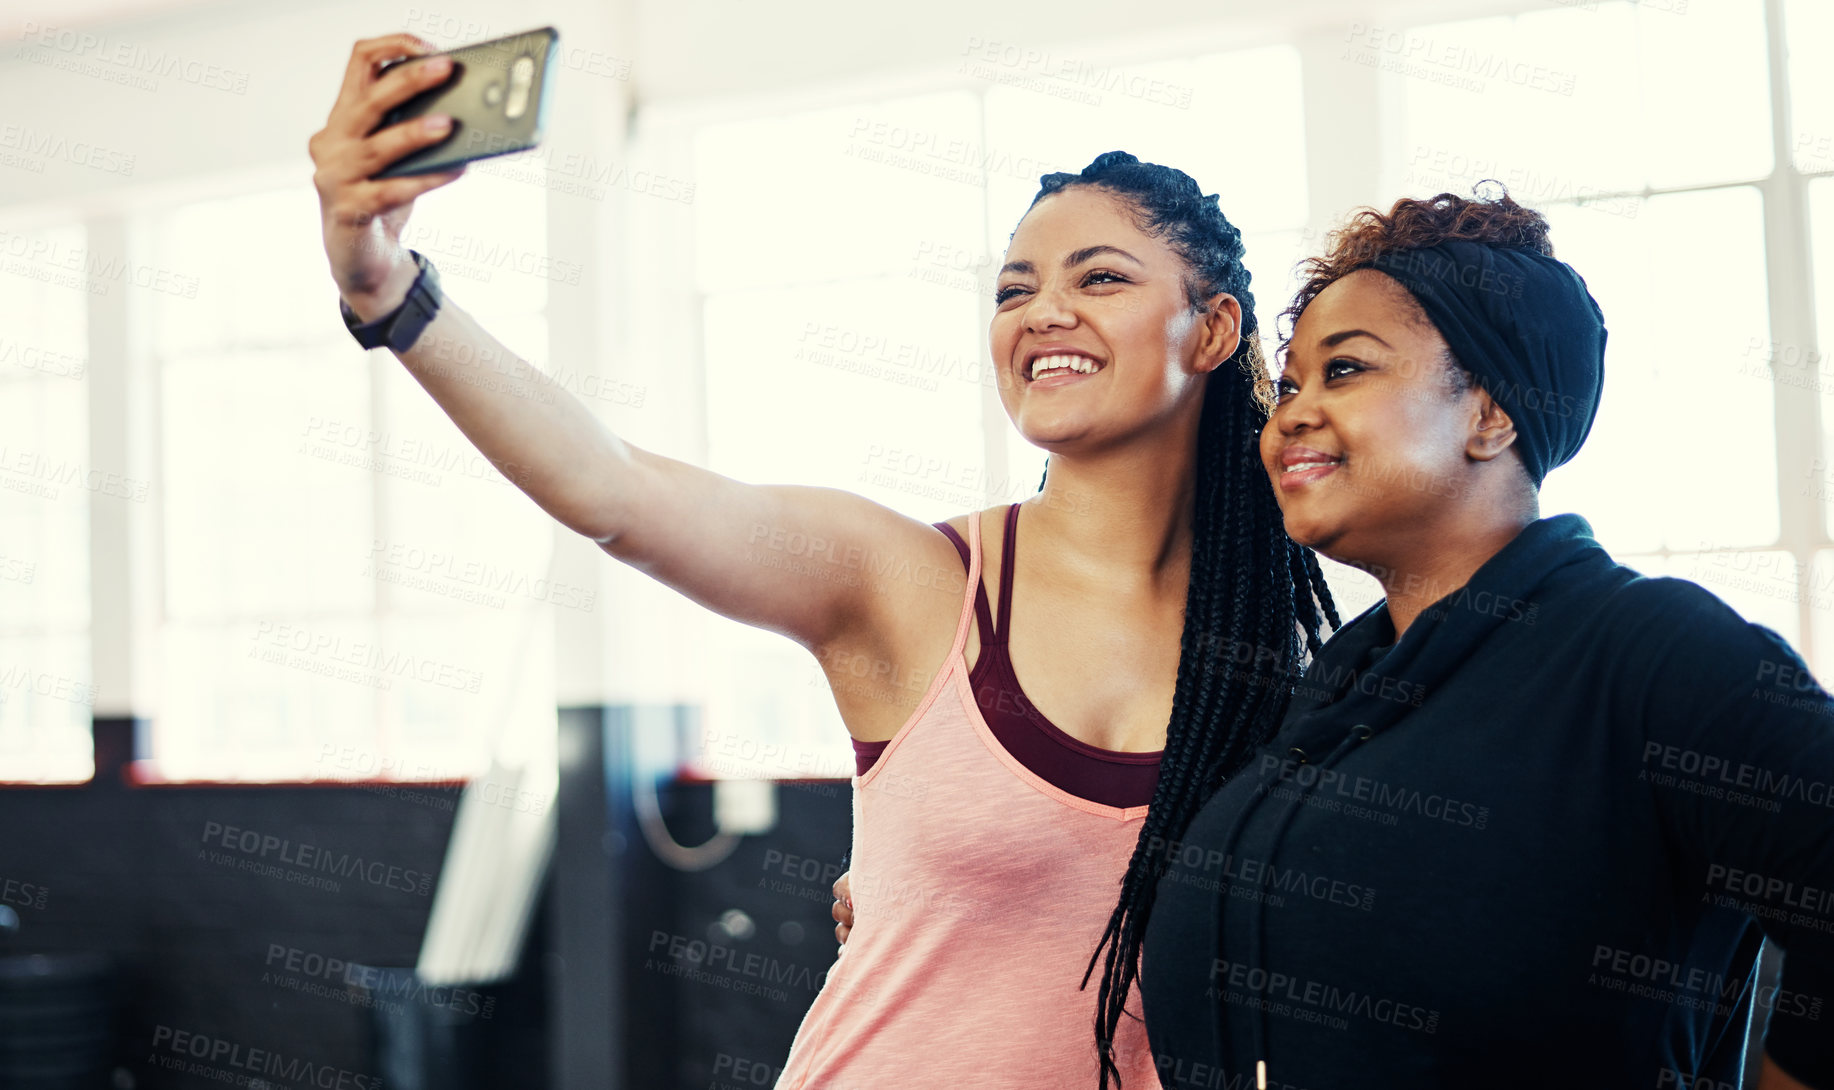 Buy stock photo Shot of two cheerful young women taking a self portrait together before a workout session in a gym